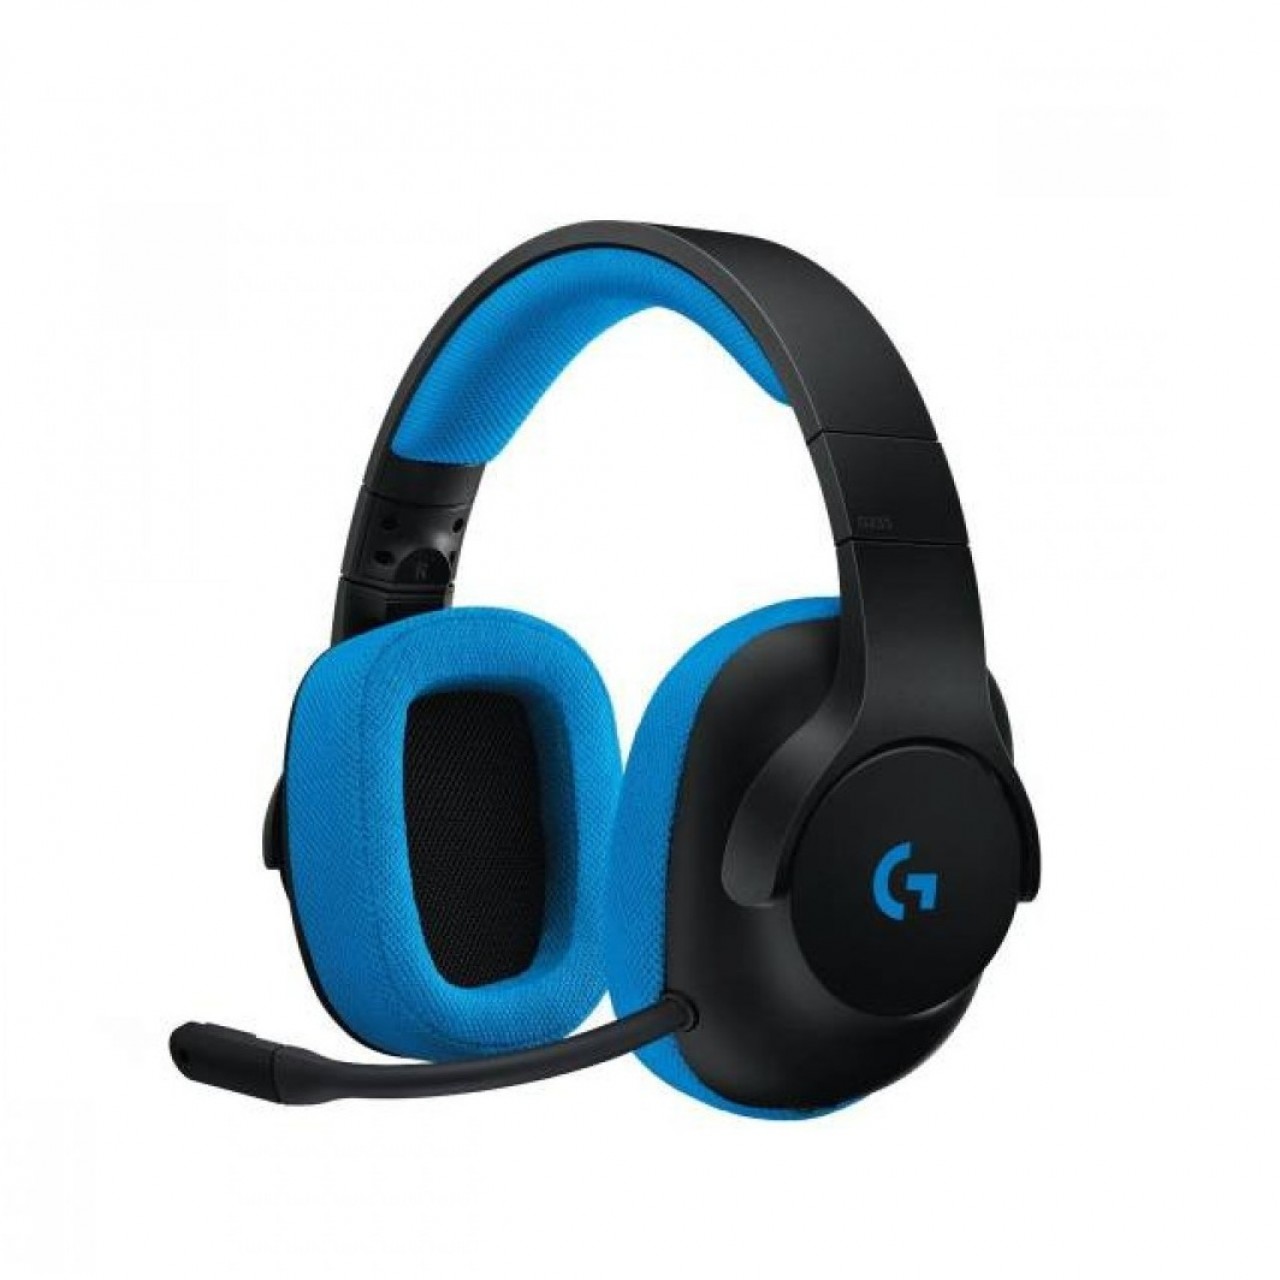 Logitech G233 Gaming Headset With Detachable Unidirectional Microphone